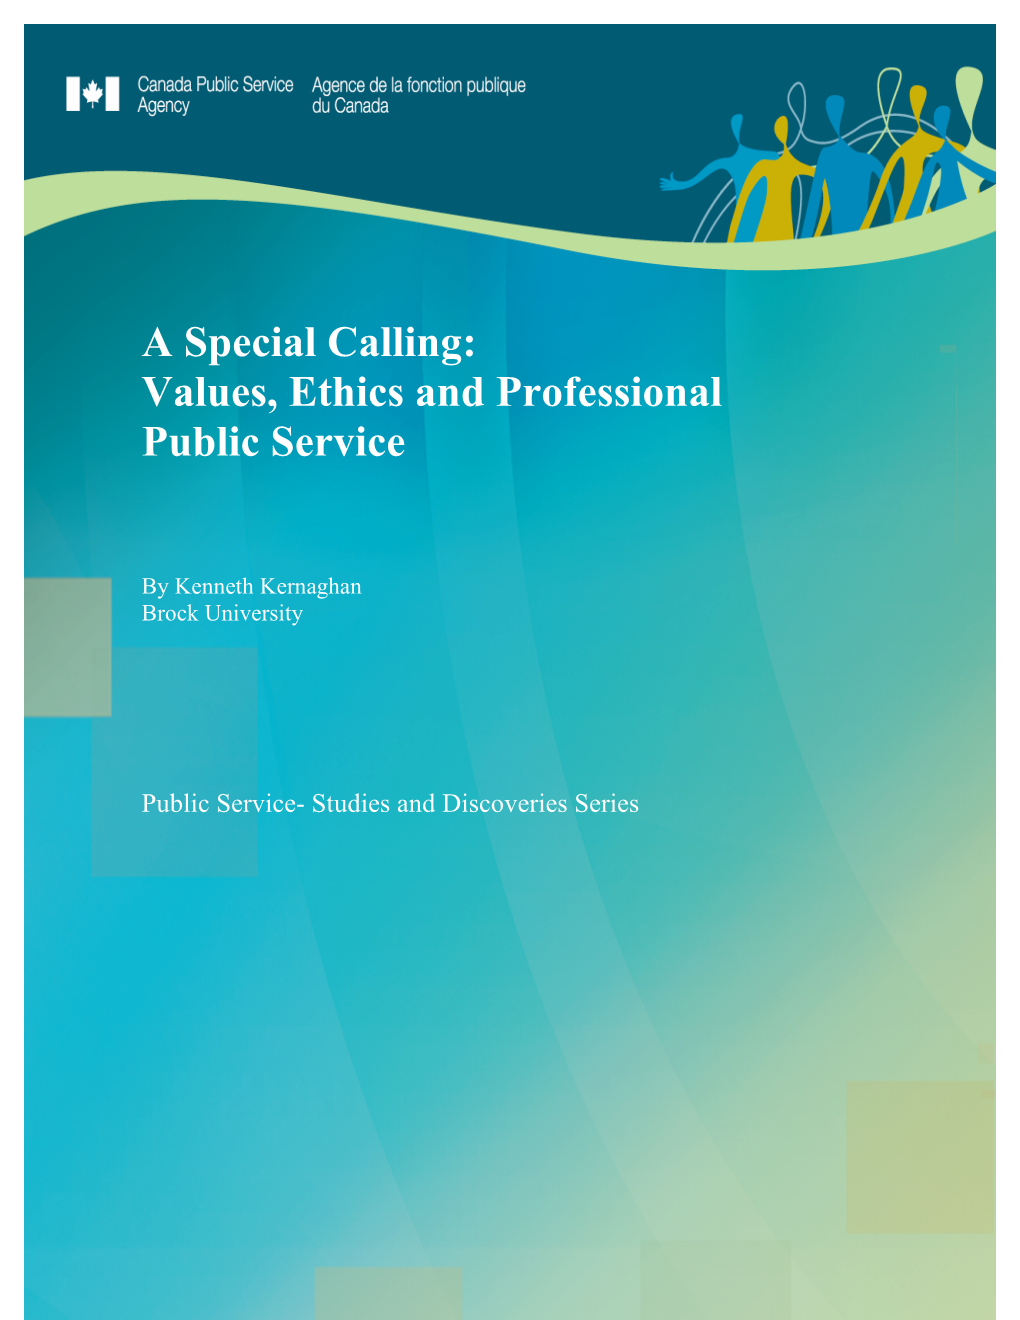 Values, Ethics and Professional Public Service